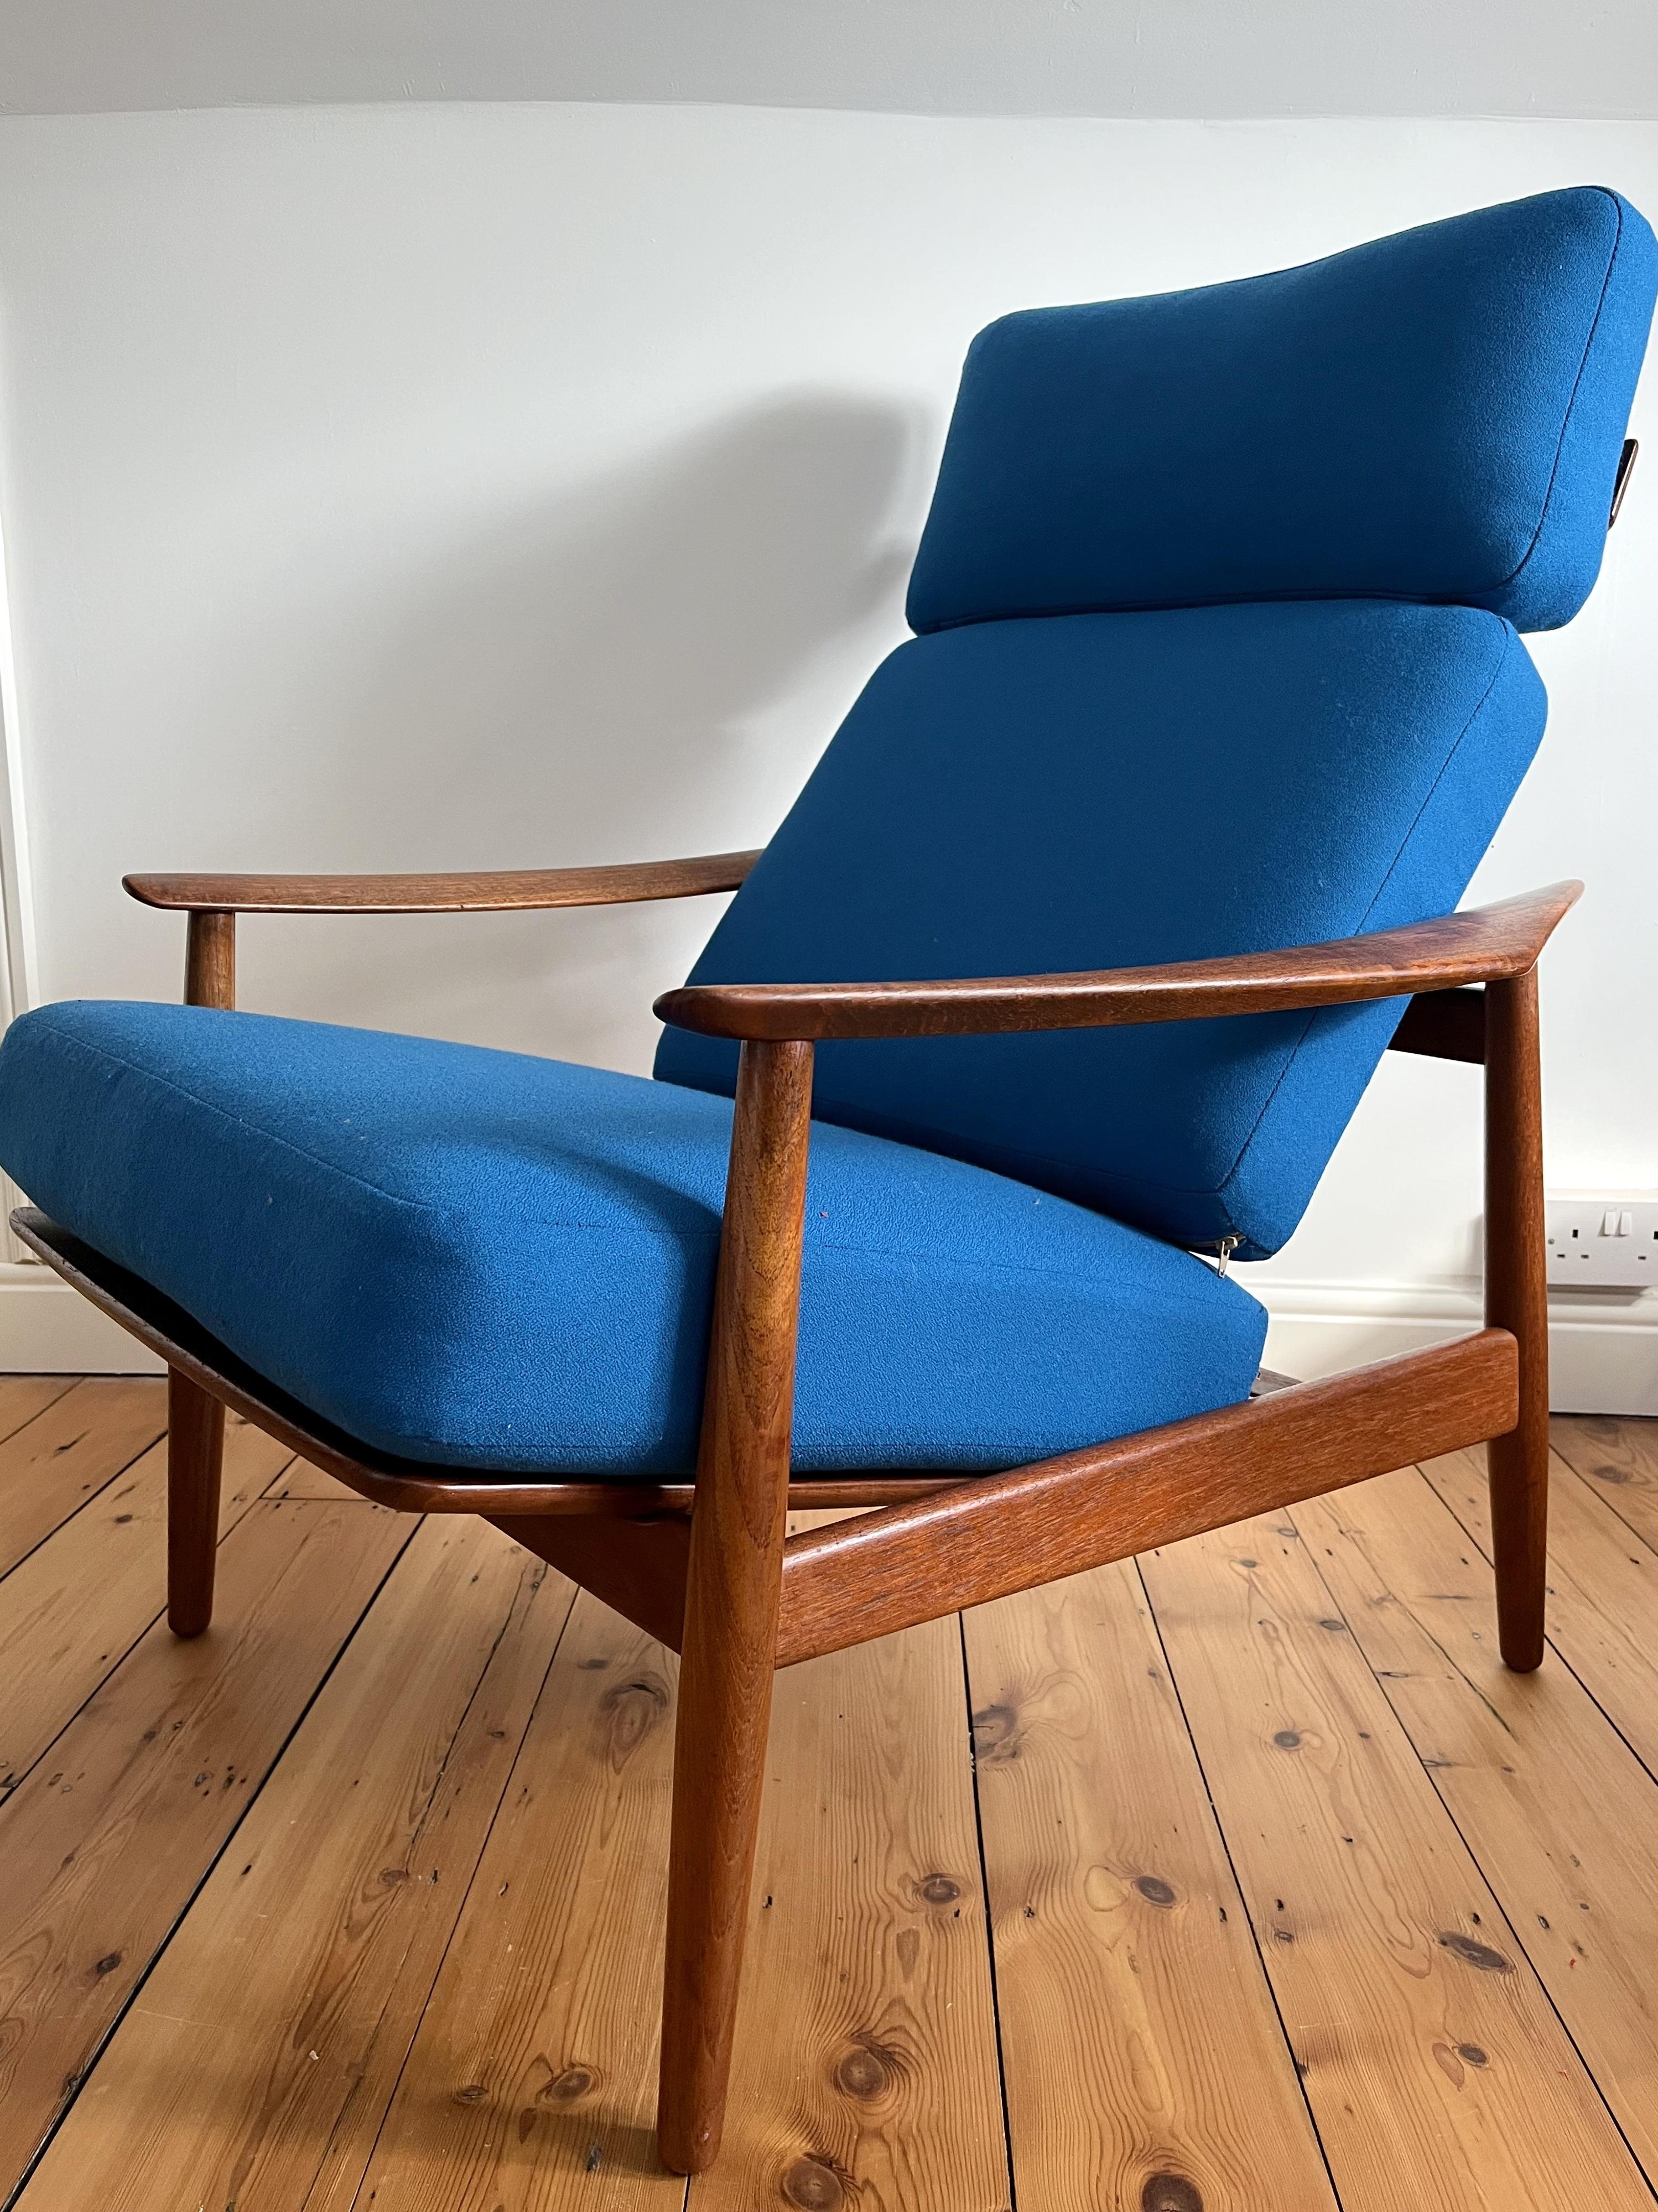 High back Arne Vodder FD164 chair manufactured by France and Son, Denmark.

The chair can be set to 3 different position from upright to reclining.

The chair is in very good condition.

The frame has been oiled and had it's webbing replaced.